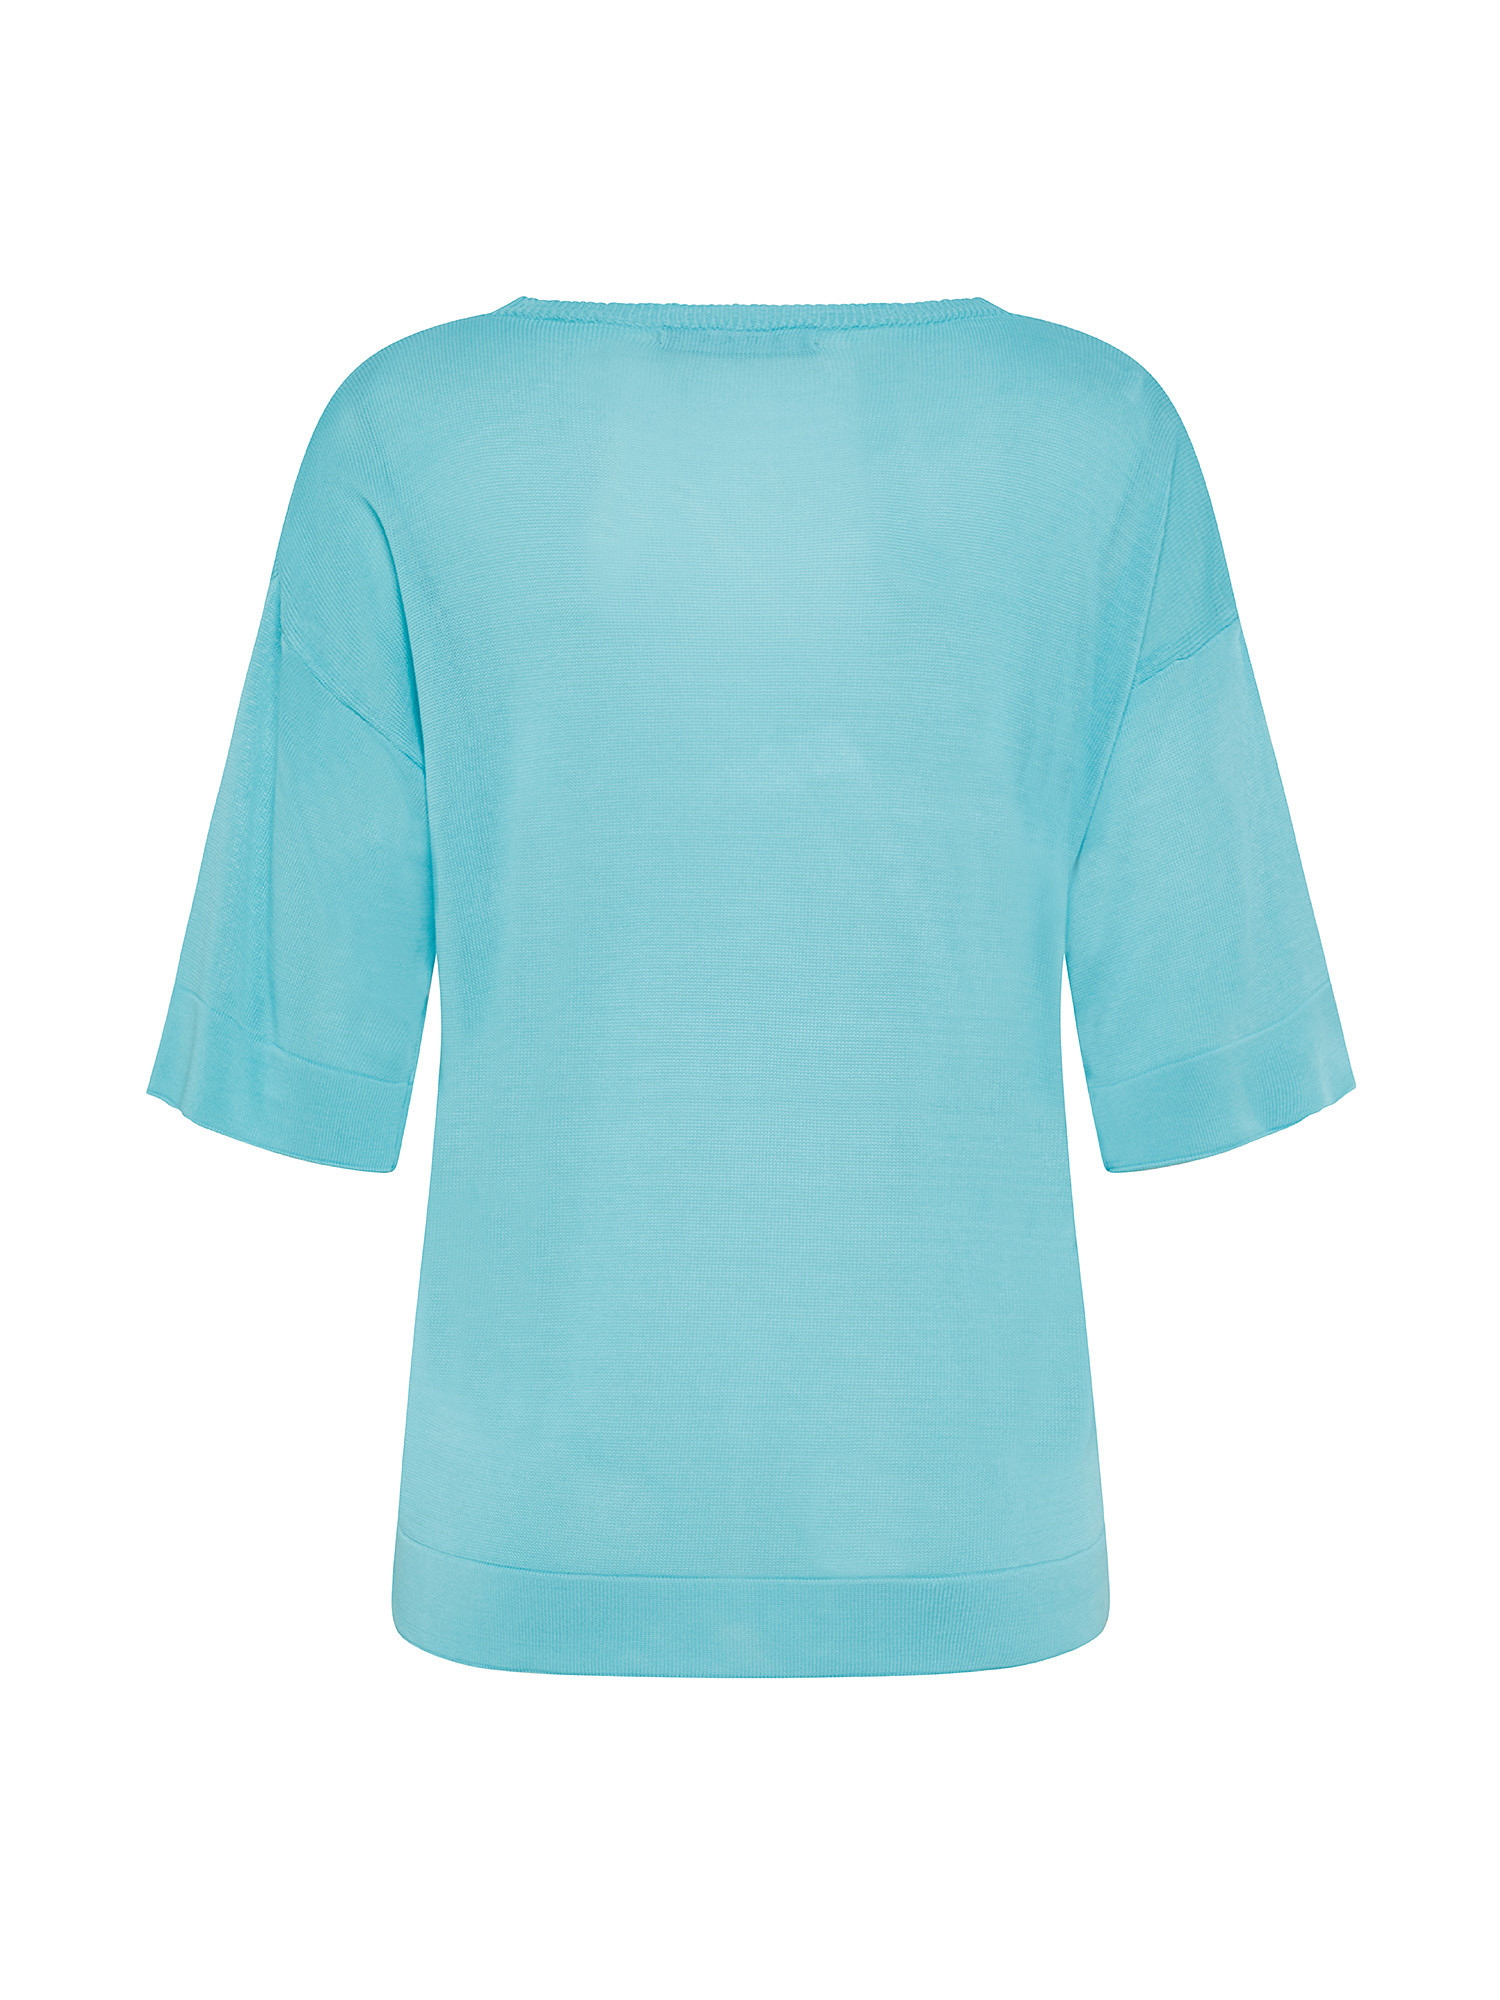 Sweater, Turquoise, large image number 1